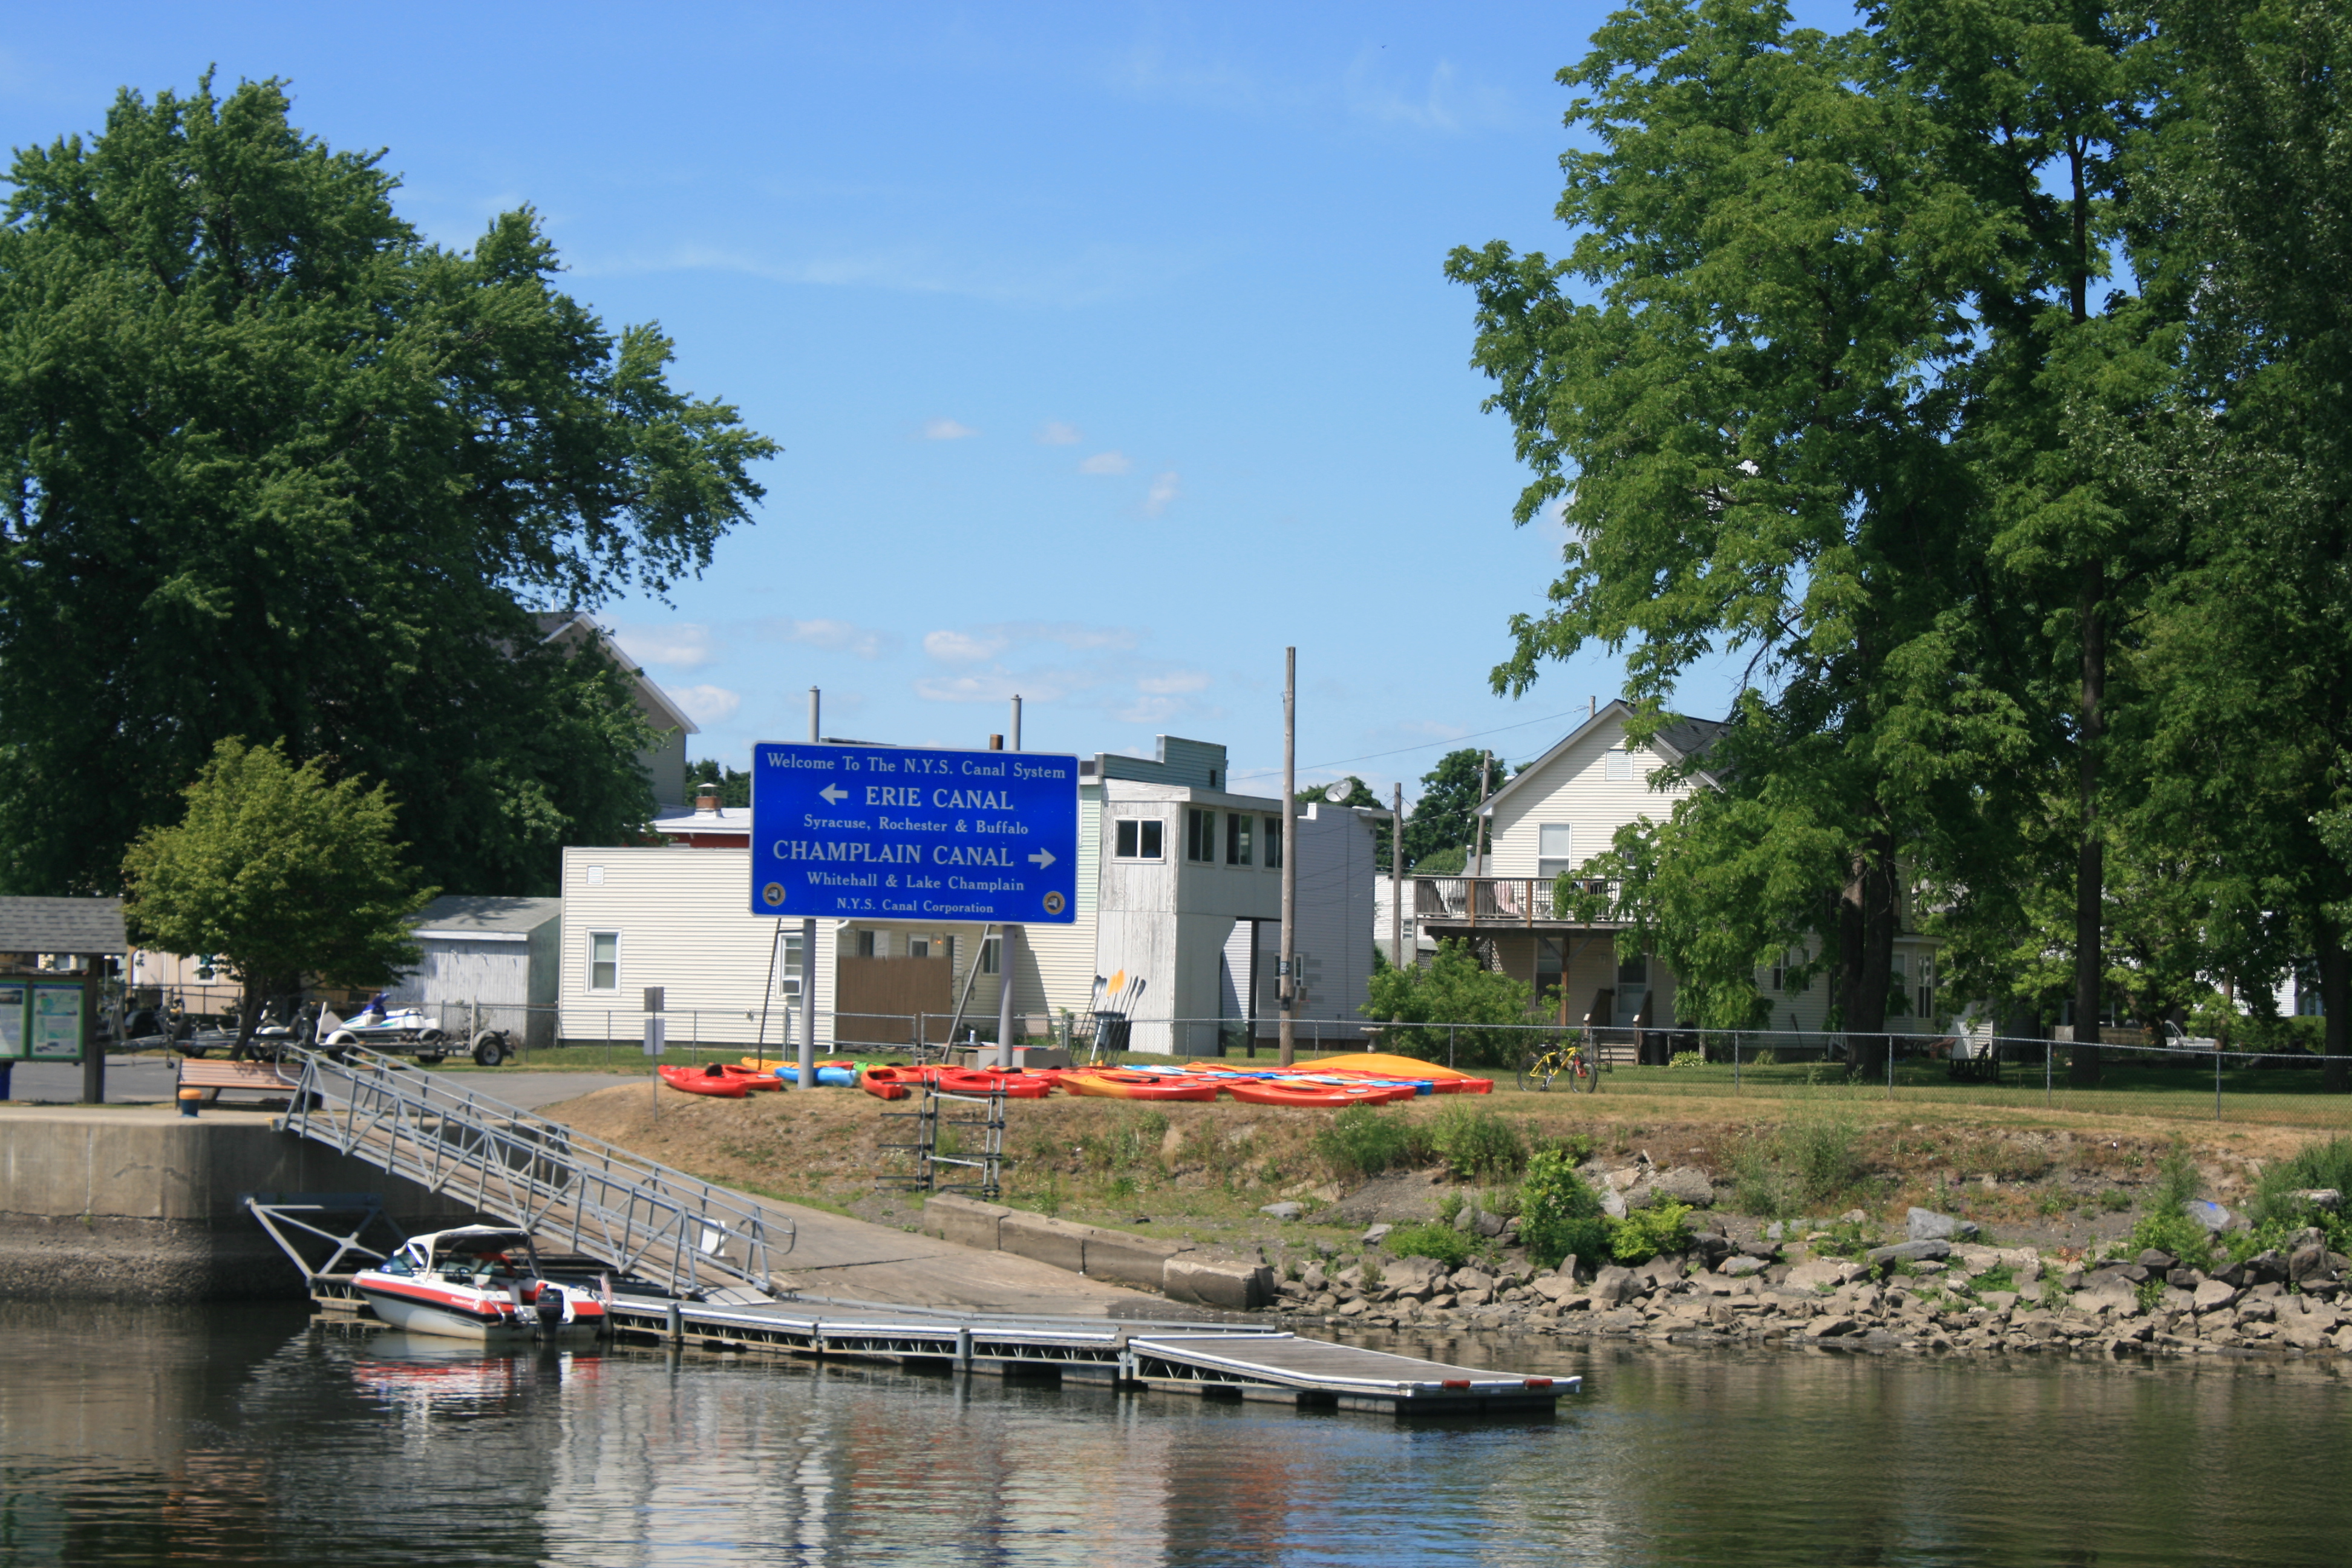 Start of the Erie Canal